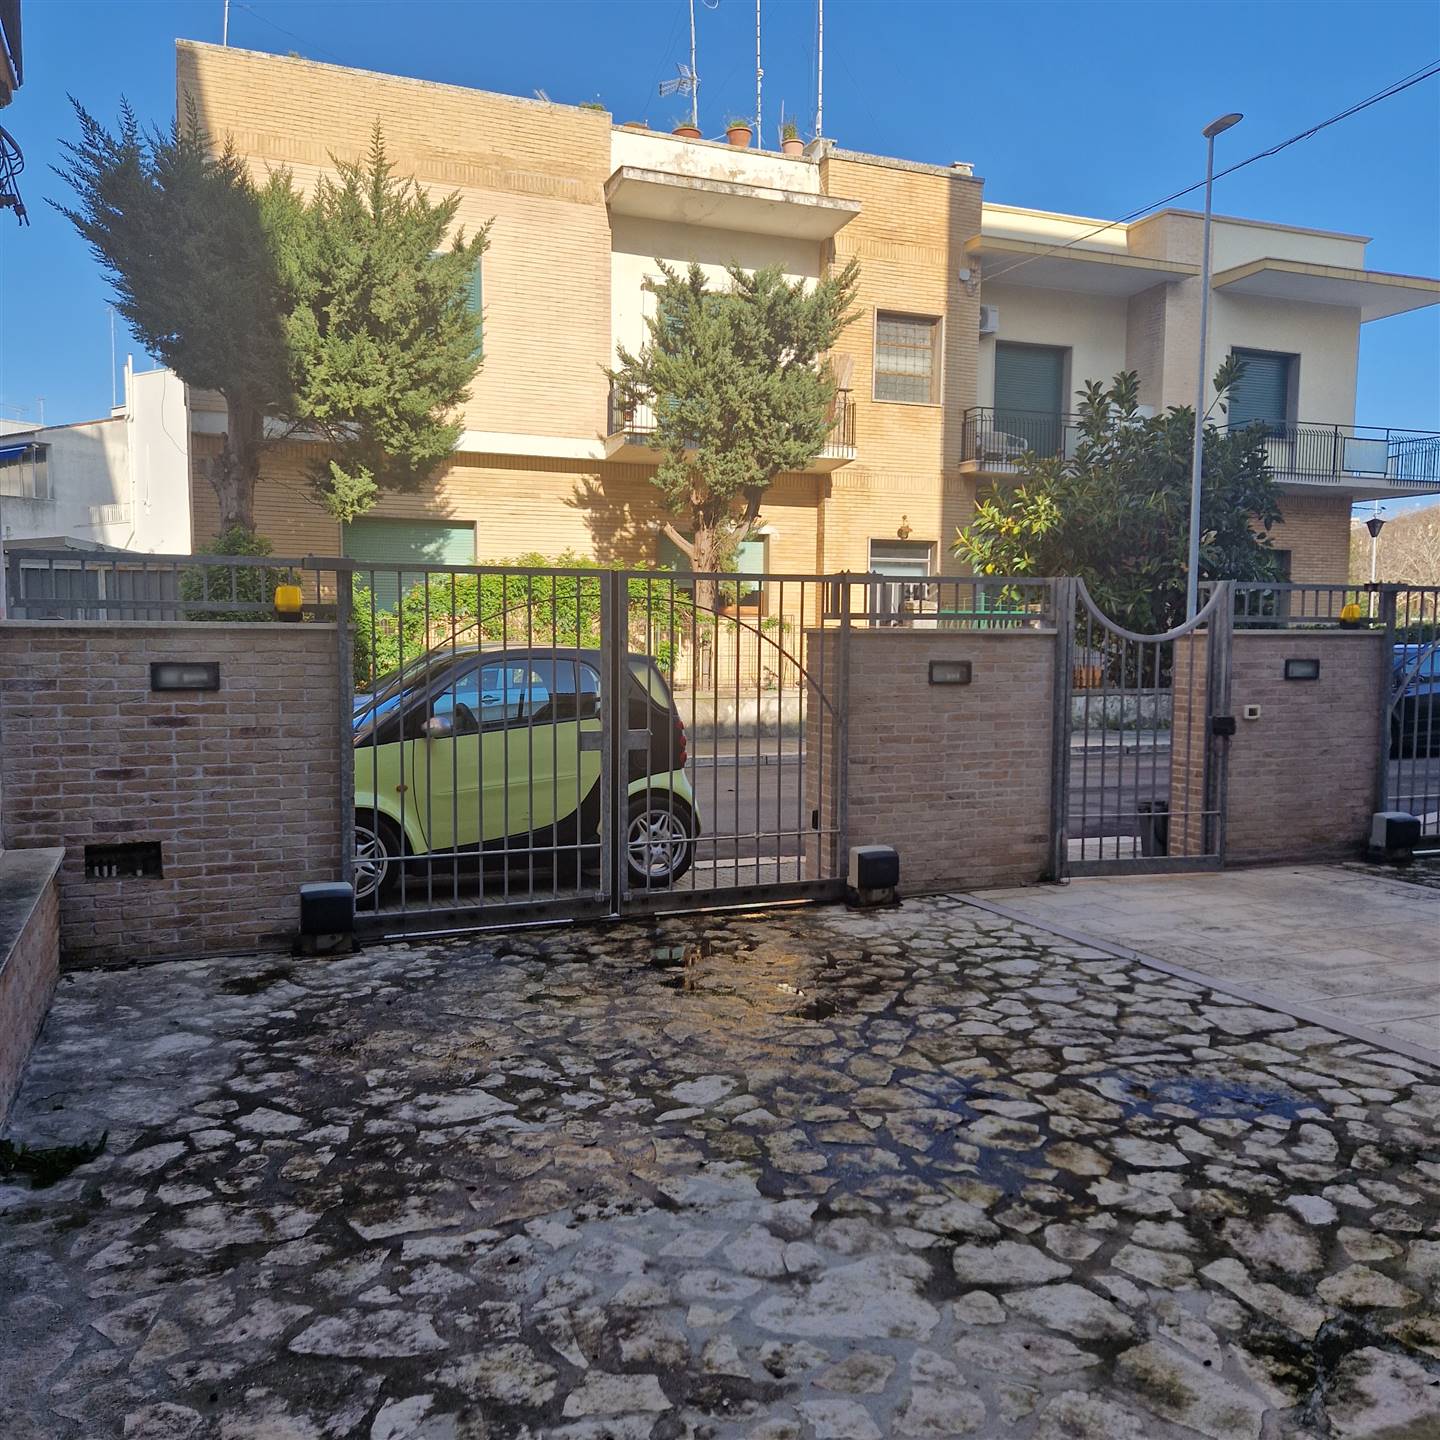 LEUCA, LECCE, Apartment for sale of 40 Sq. mt., Heating Individual heating system, Energetic class: E, placed at Ground on 2, composed by: 1 Room, 